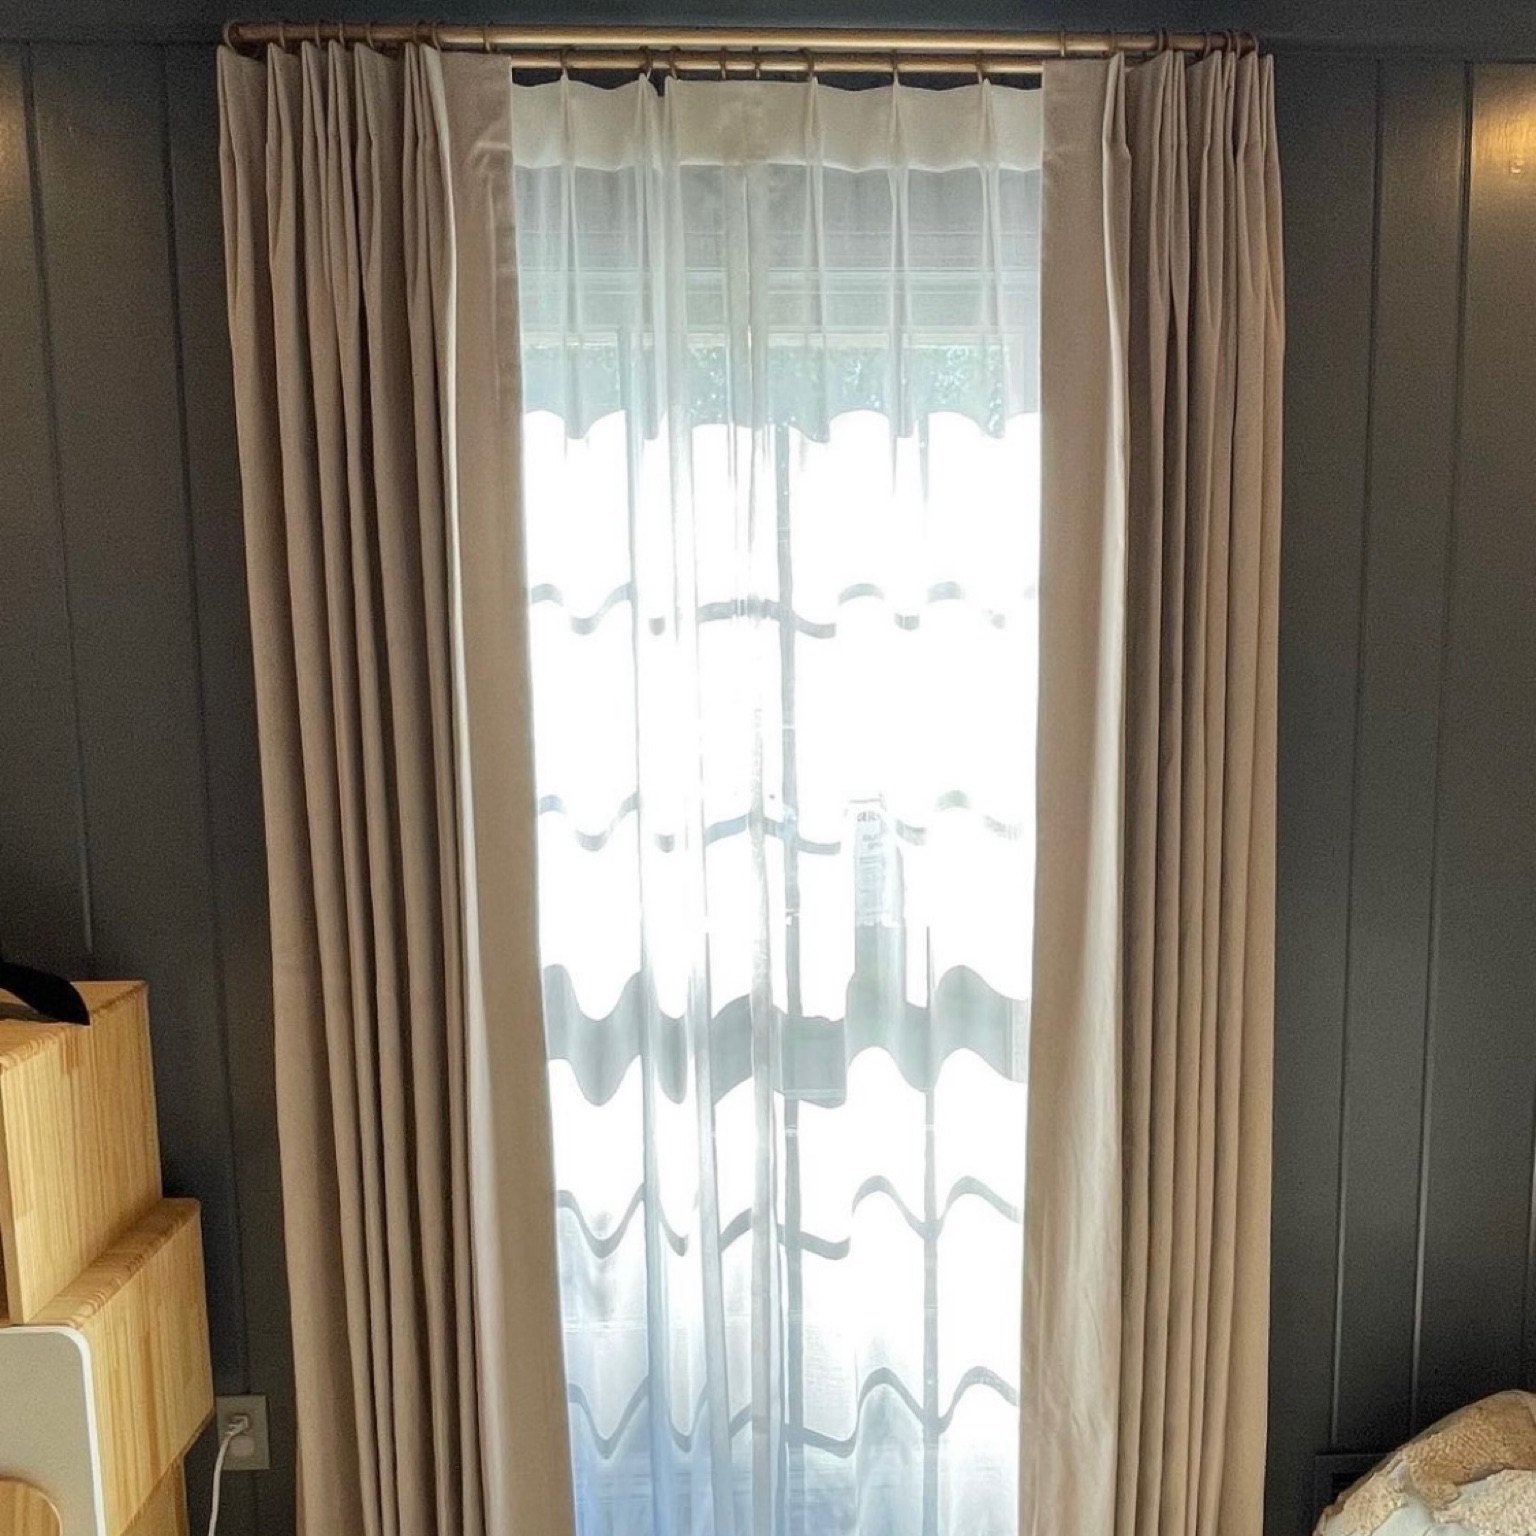 A sheer curtain covering a window. Sunlight is visible through the curtain and it is positioned underneath another type of window treatment.